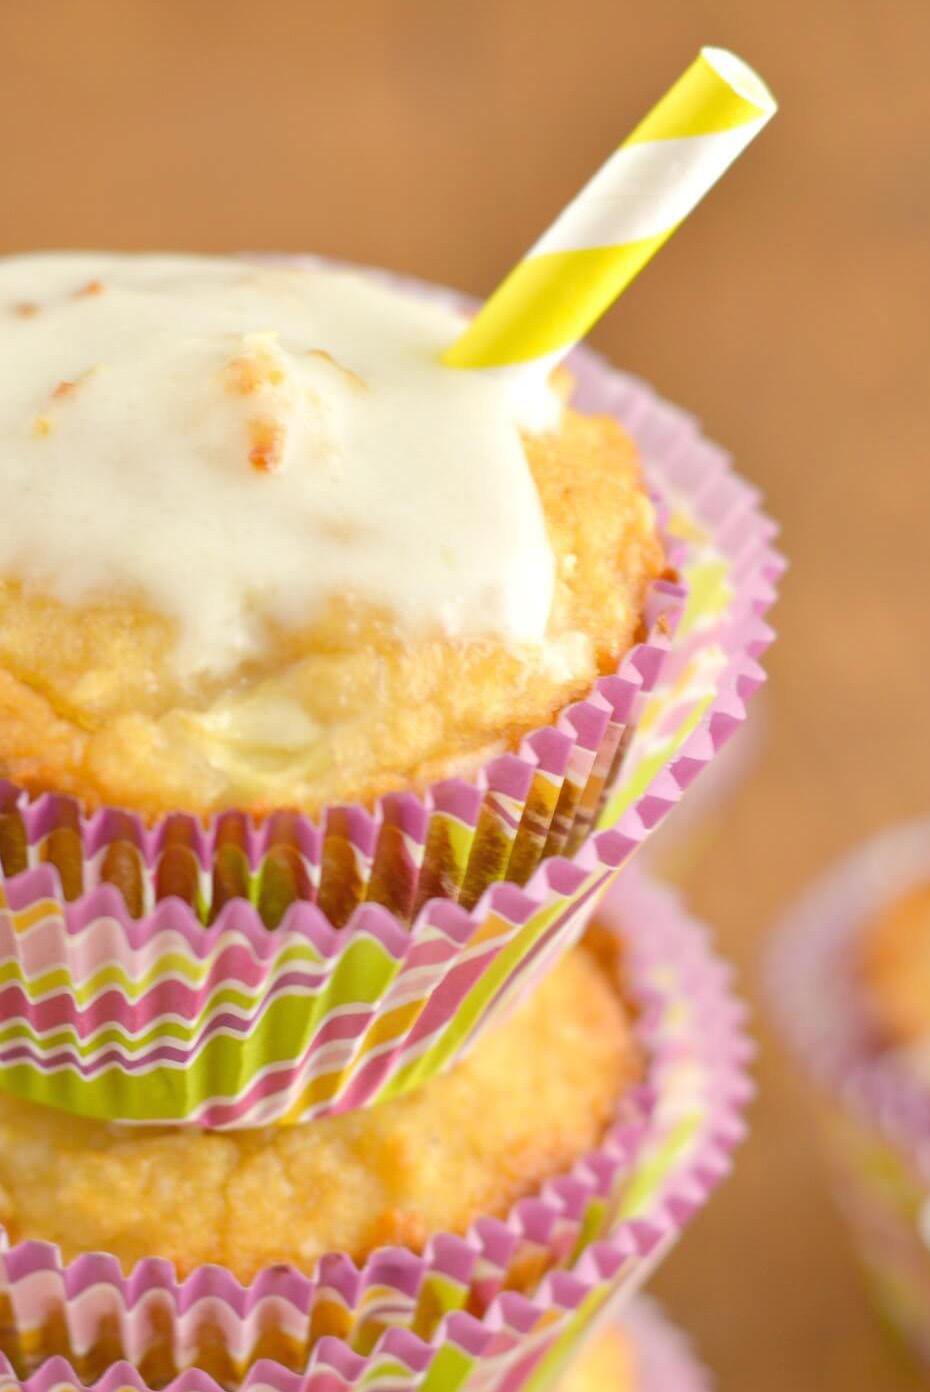 PINA COLADA Muffins Prep Time: 5 minutes Cook Time: 25 minutes Serves: 6 muffins 6 large egg whites 1 cup almond meal ¼ cup coconut flour ½ cup pineapple, sliced into ¼-inch pieces ¼ cup honey ¼ t